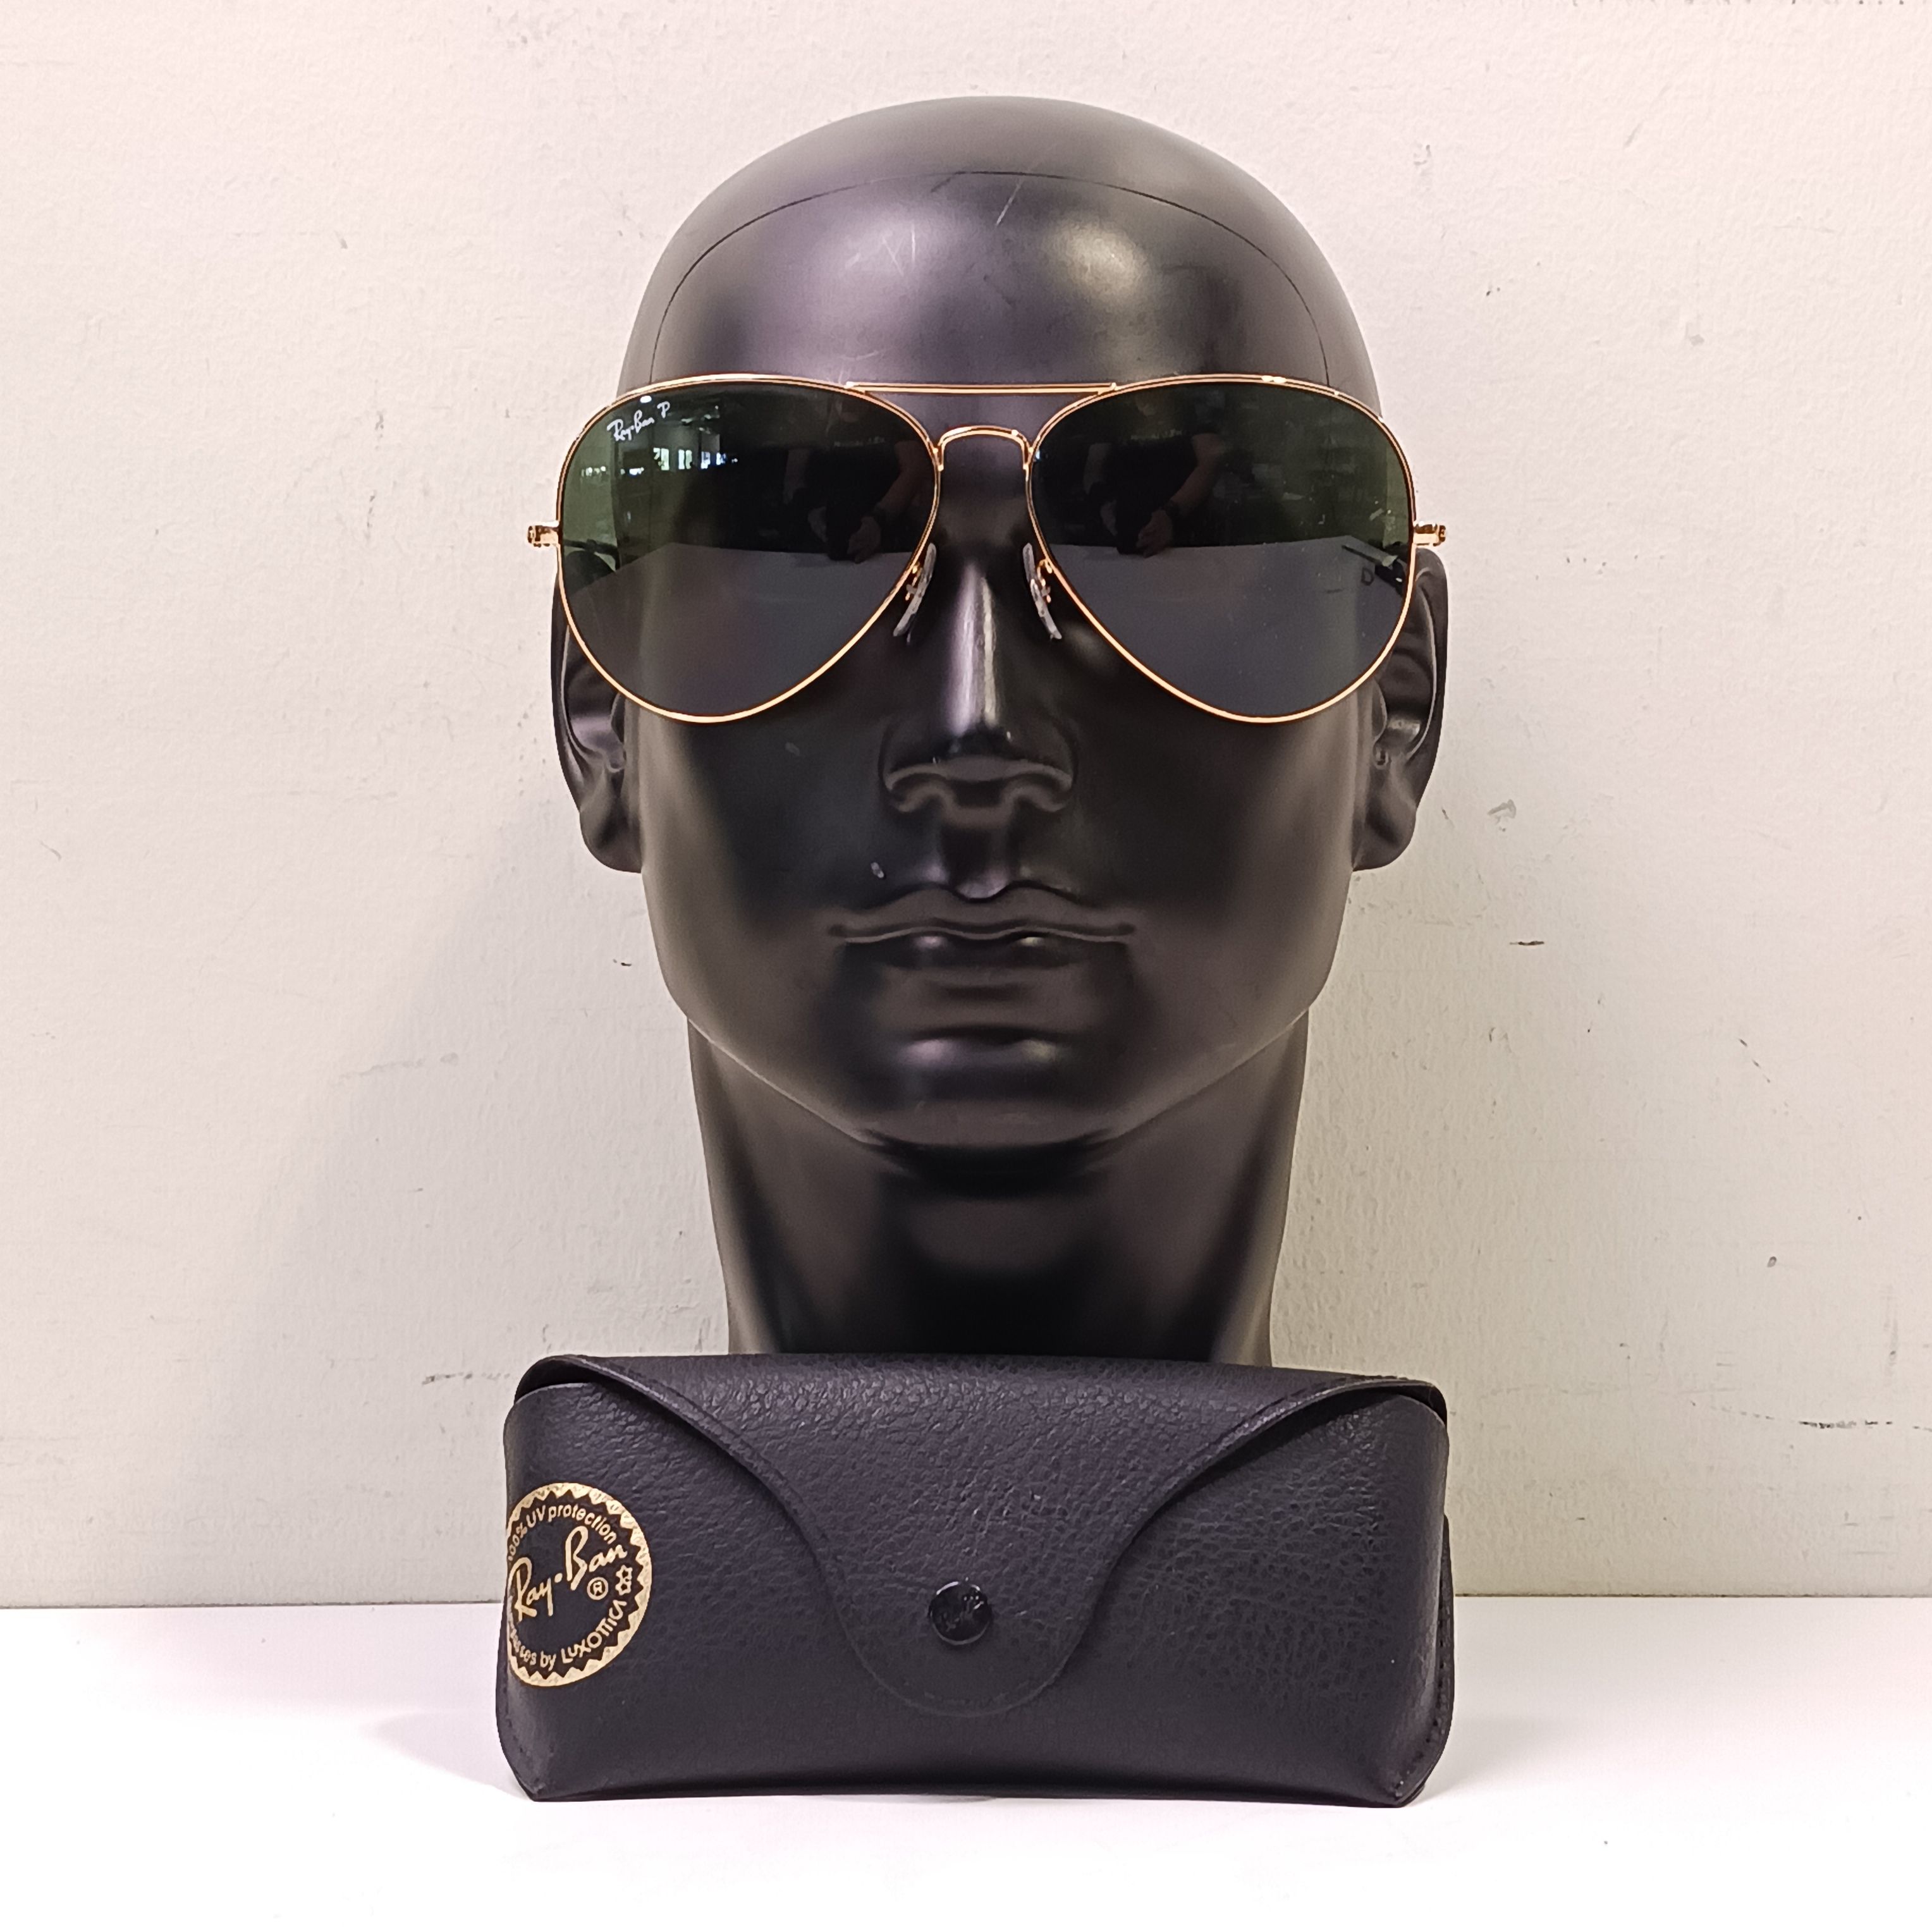 AVIATOR CLASSIC Sunglasses in Gold and Black - RB3025